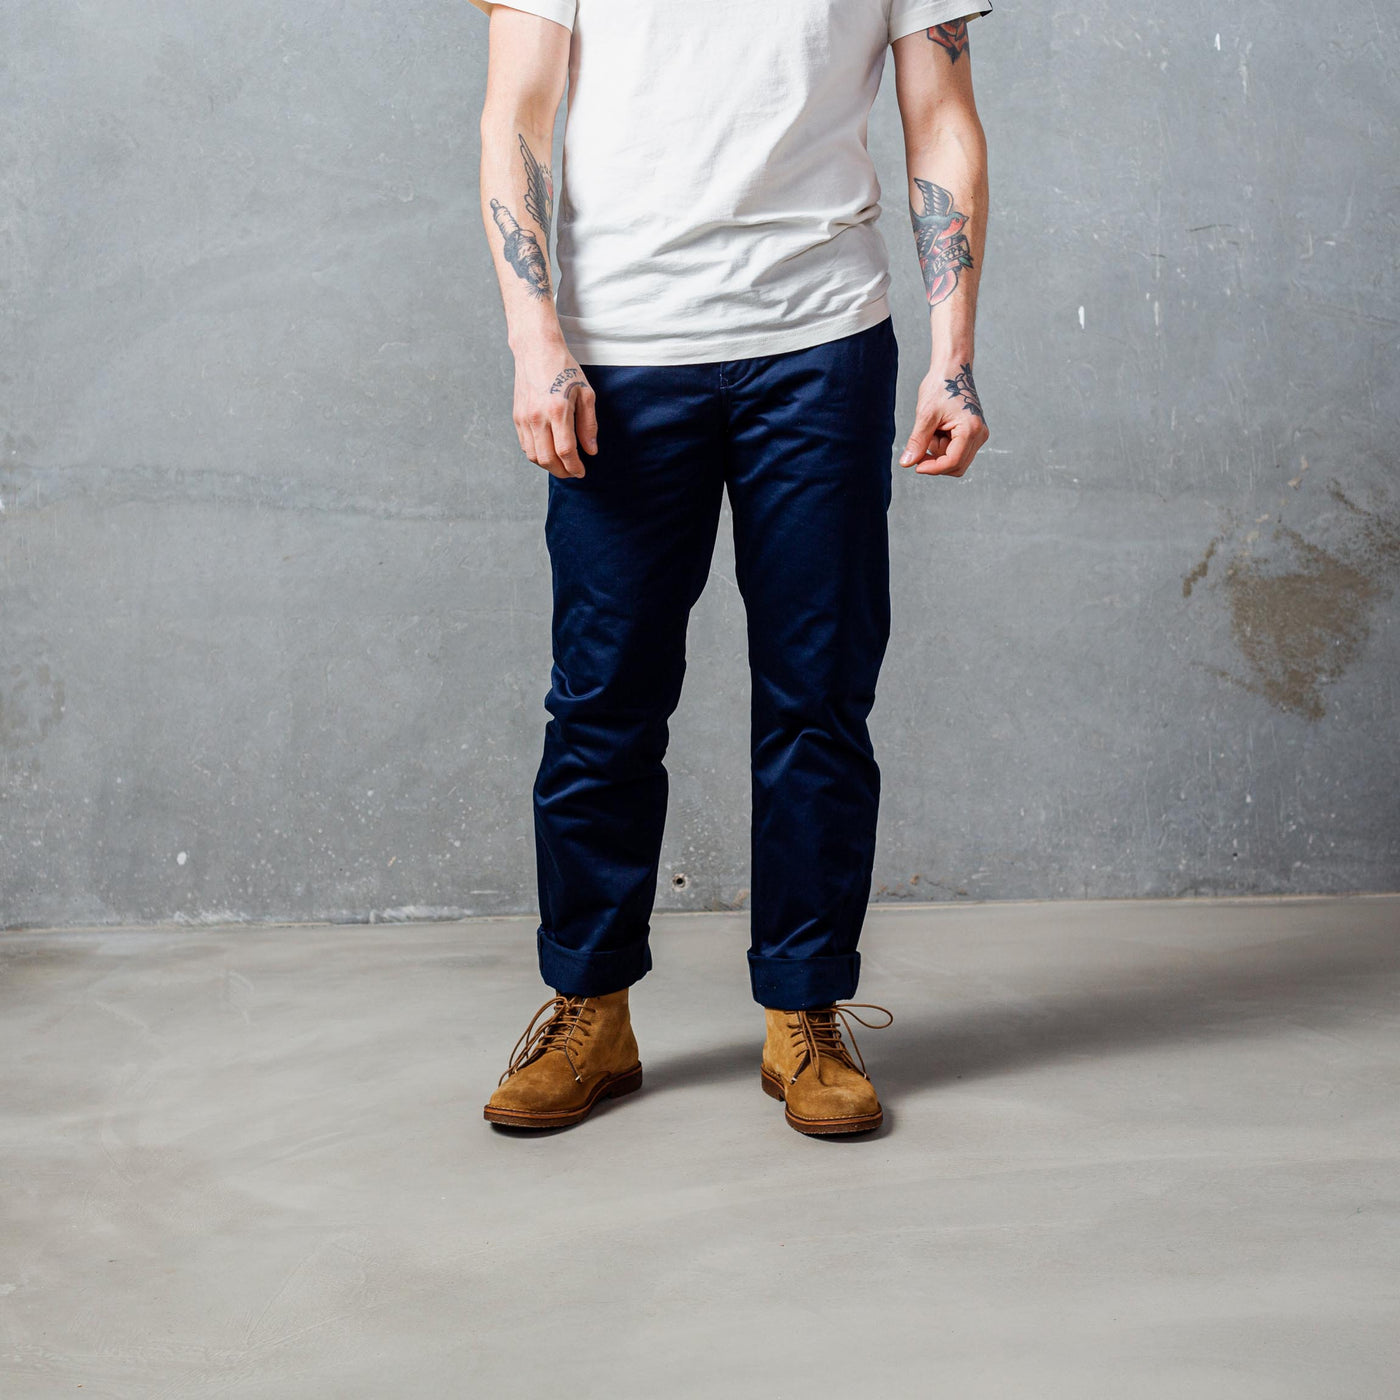 Dunville - Chinos - Navy